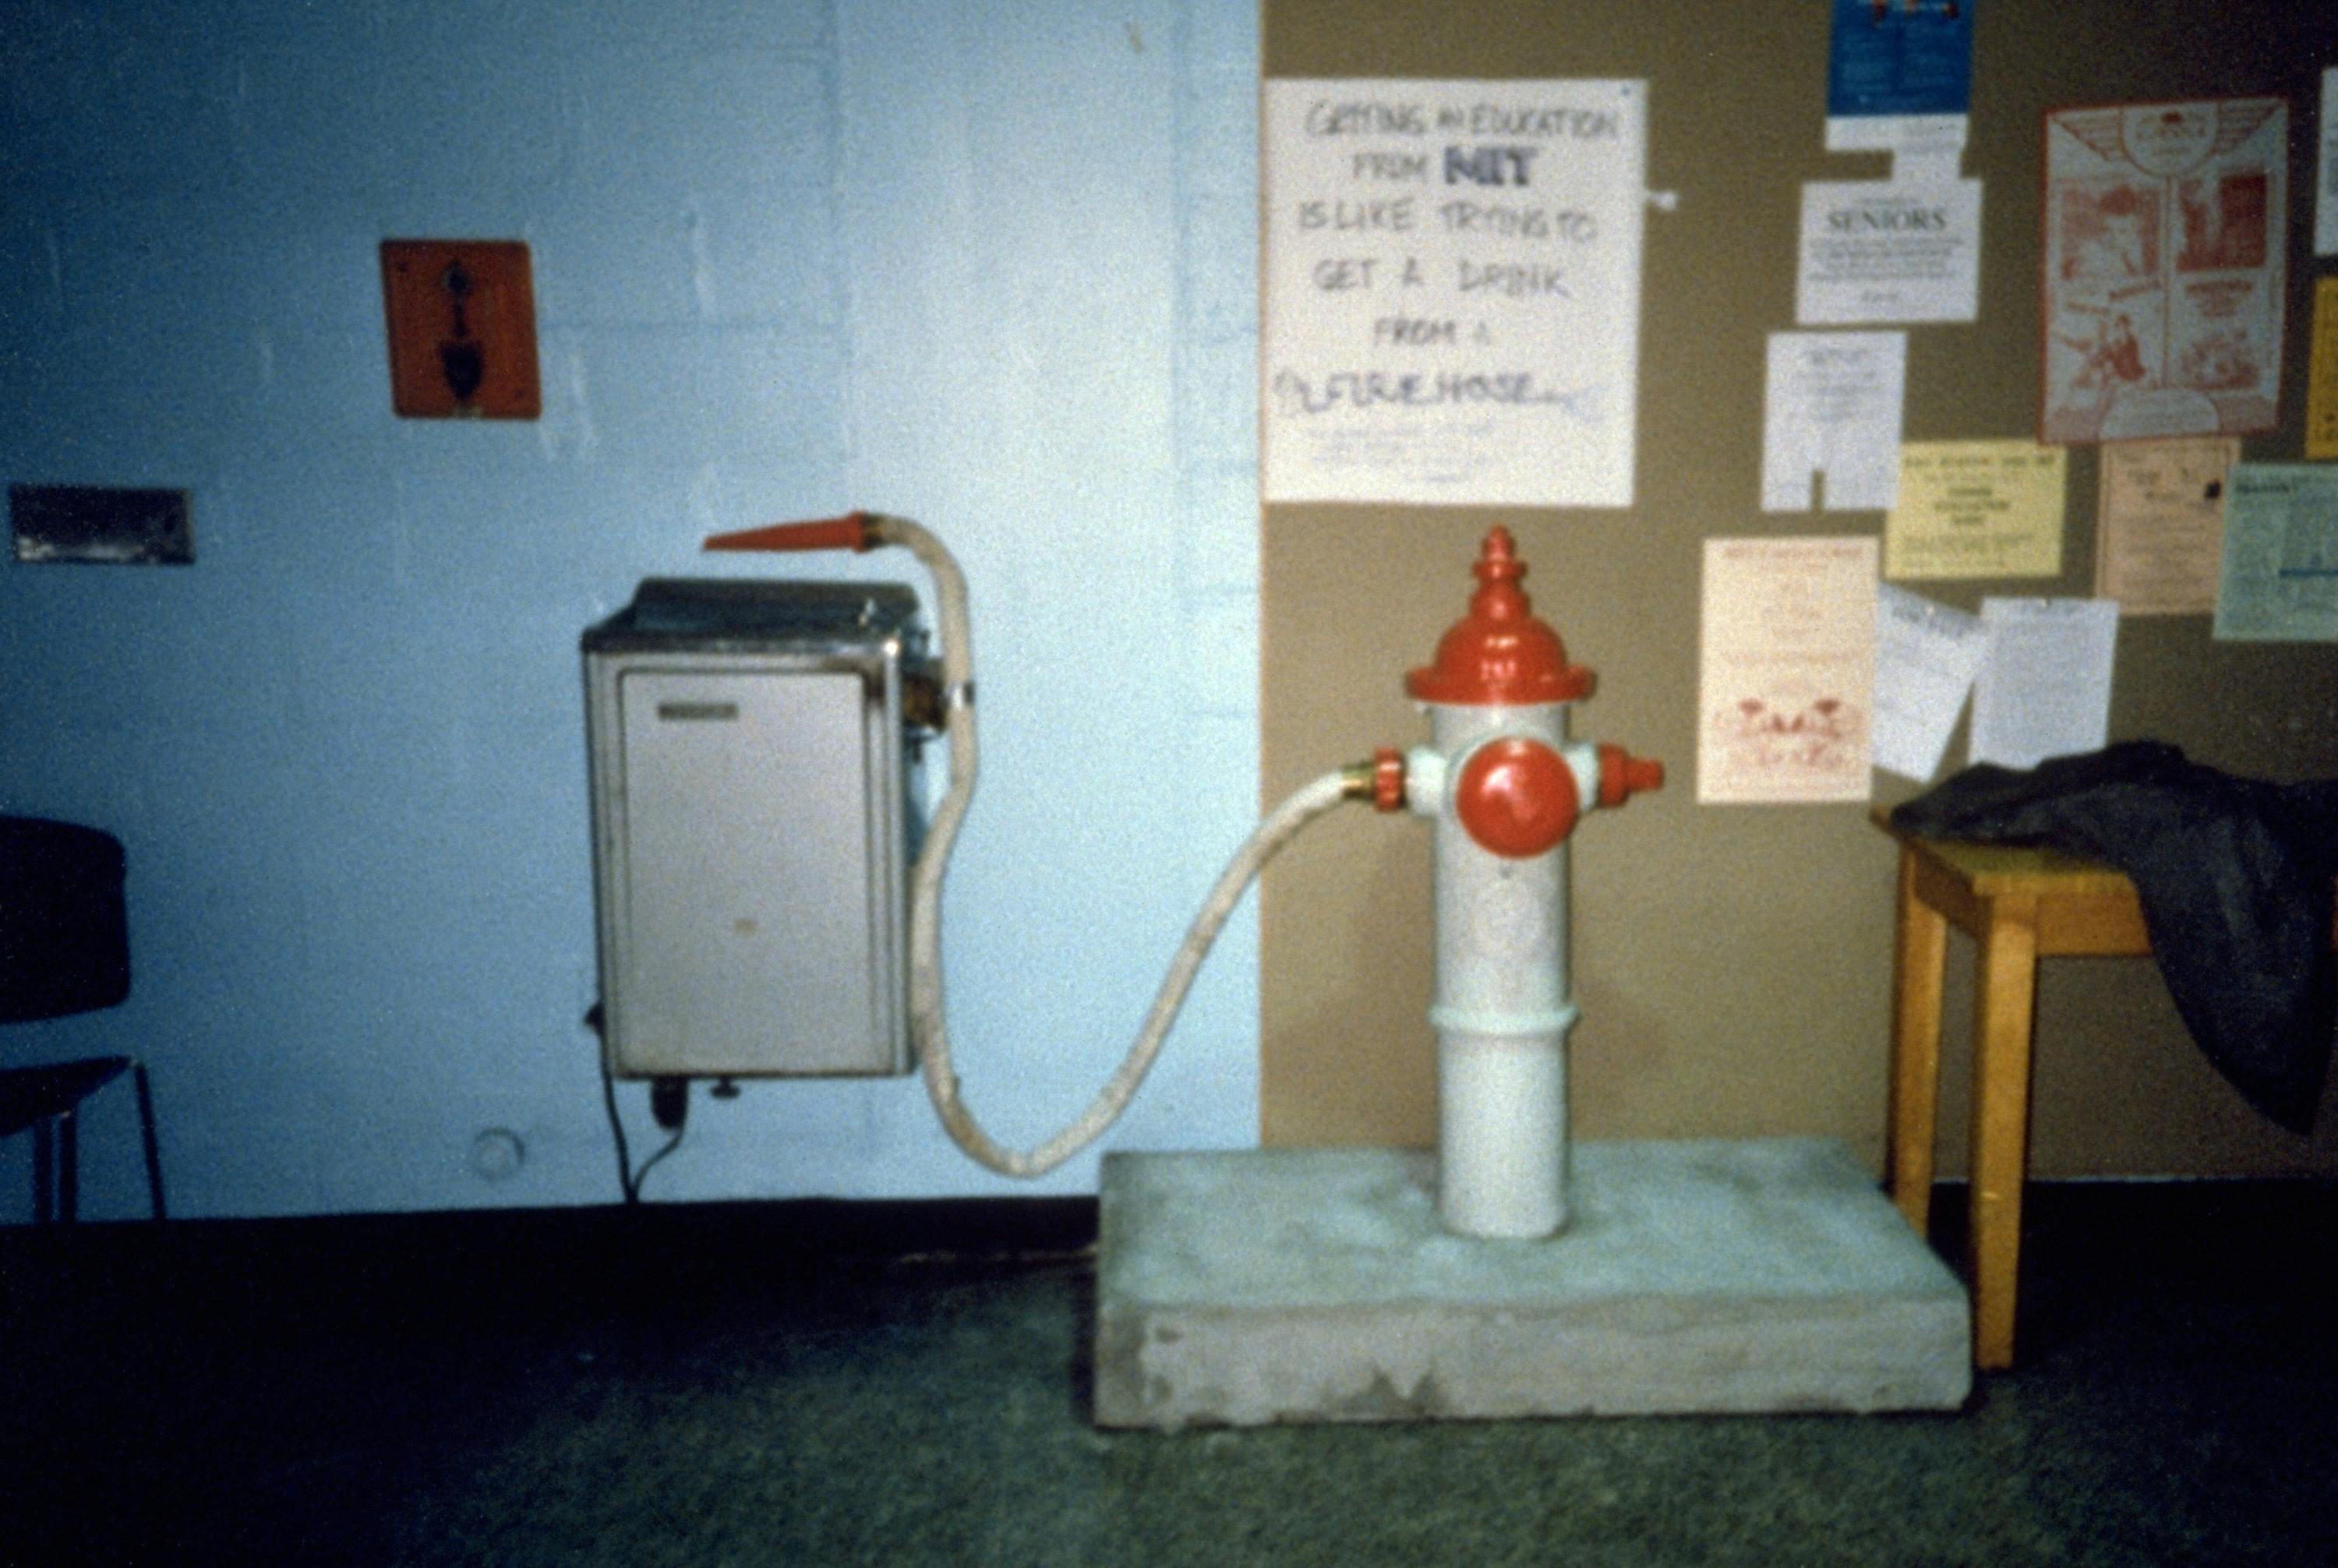 water fountain hooked to fire hydrant to show what an MIT education is like